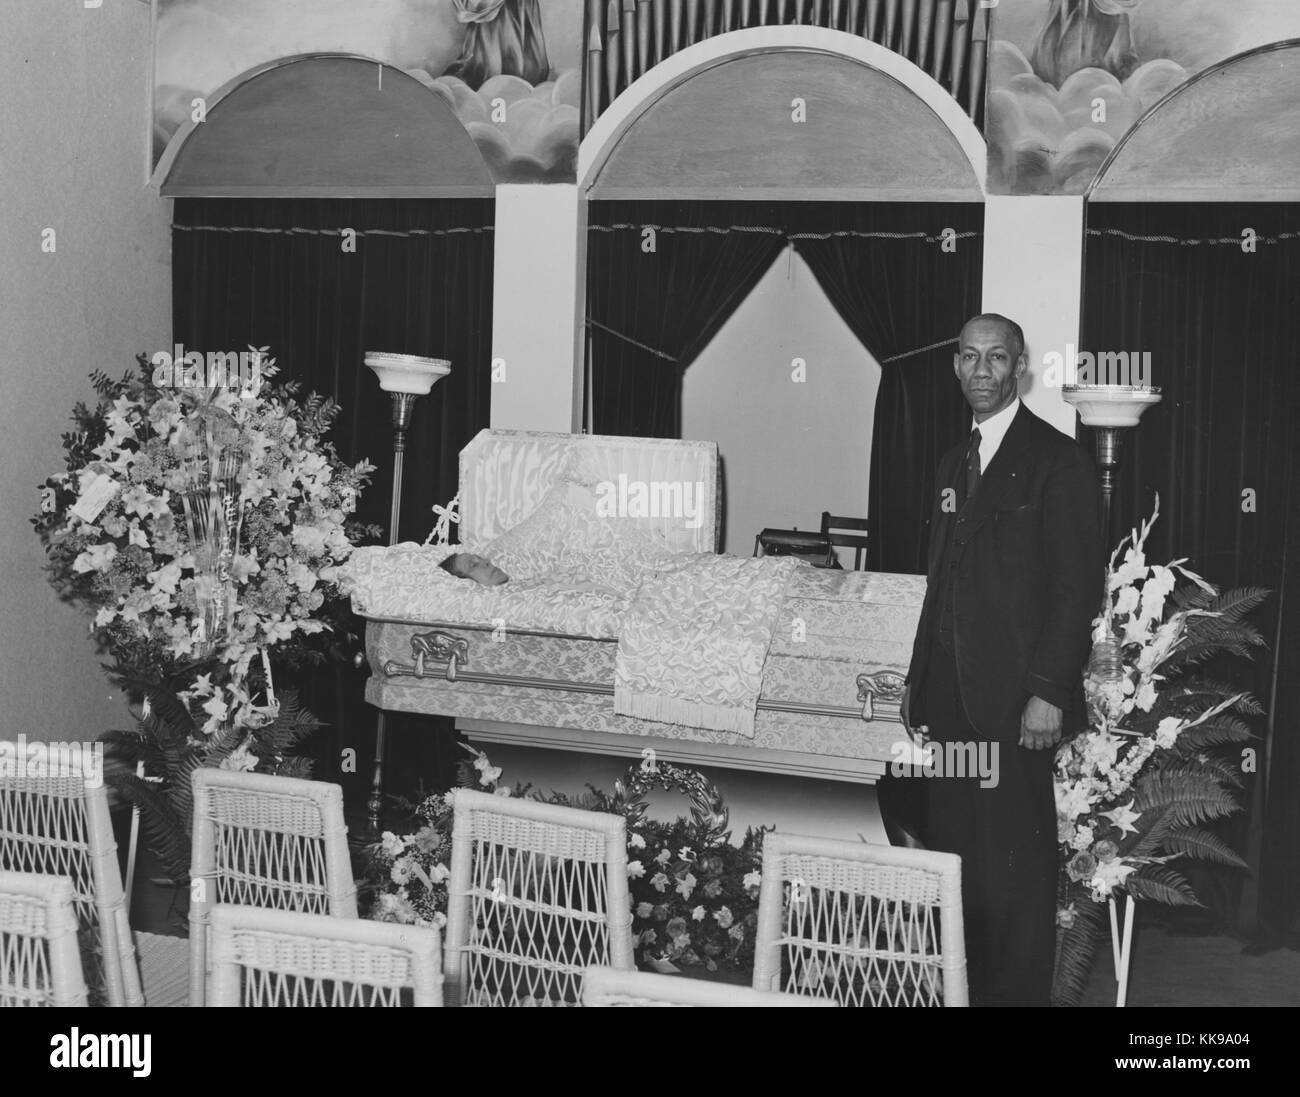 A photograph of an undertaker standing at the foot of a casket. He is wearing a black suit and has a solemn expression on his face. Only the face of the person in the casket is visible. The room has been decorated with bouquets of flowers to prepare it for the funeral service that is about to be held. Religious imagery is painted on the wall surrounding the pipes for an organ, Southside of Chicago, Illinois, 1864. From the New York Public Library. Stock Photo